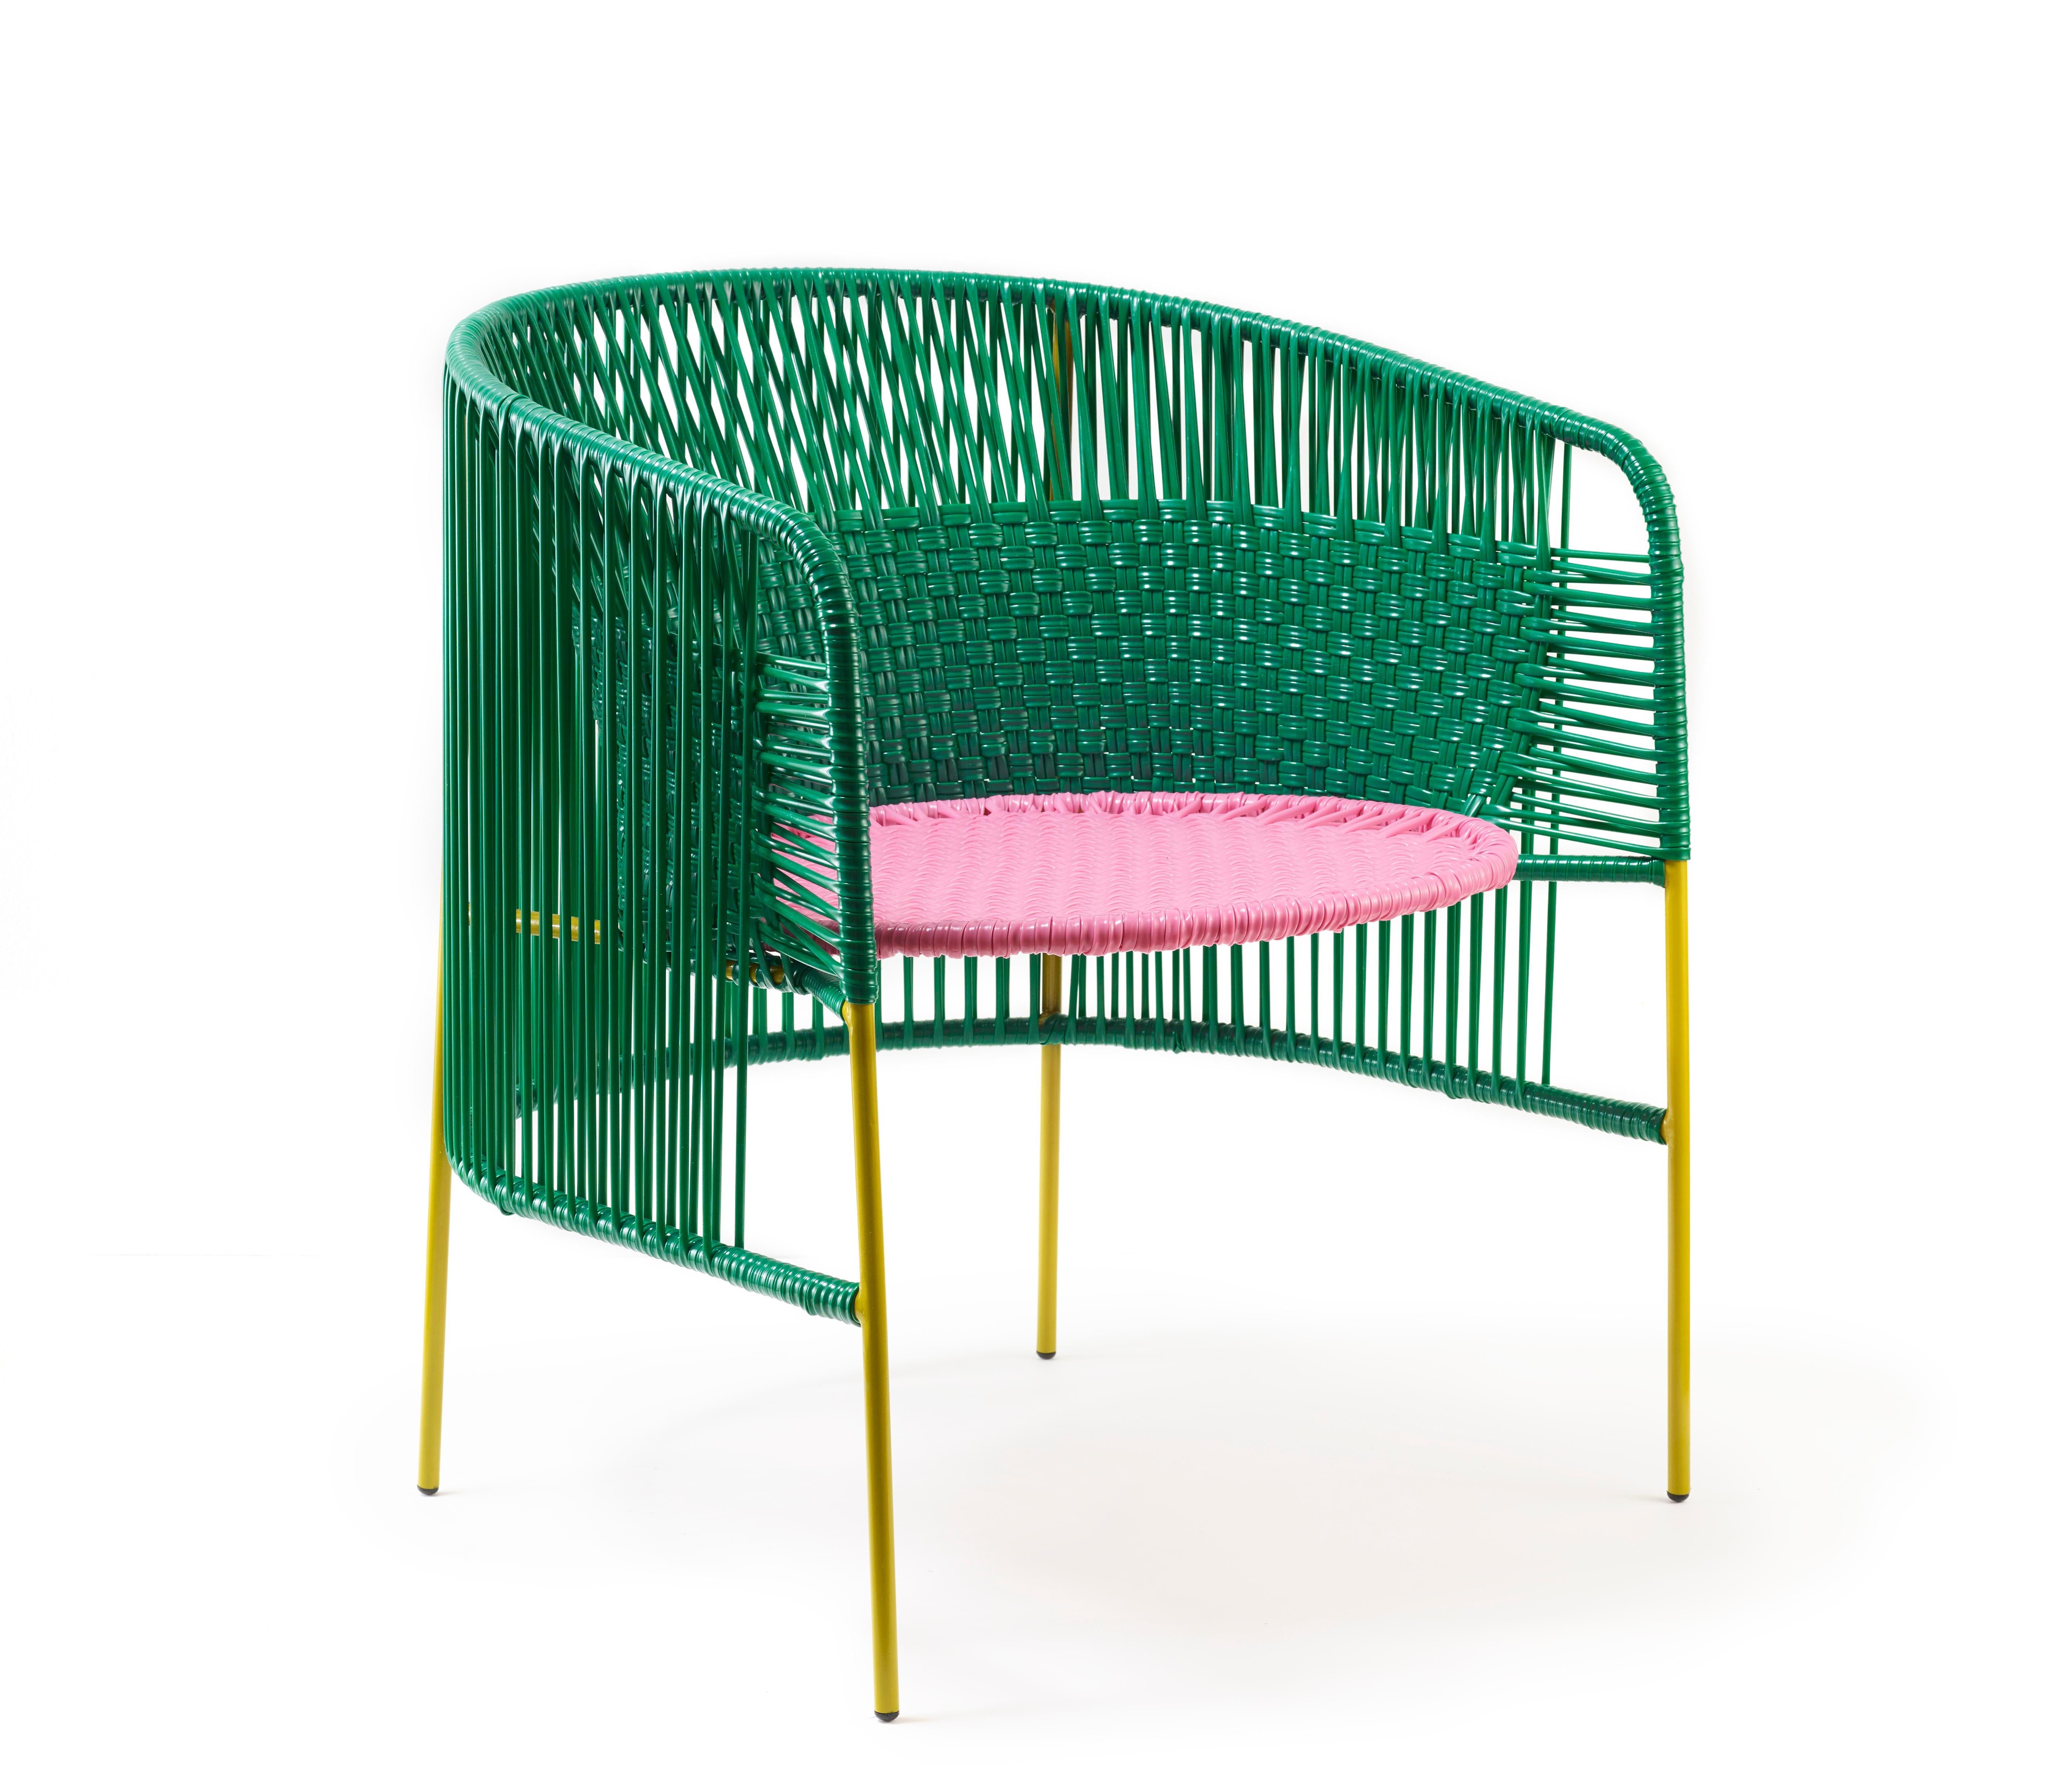 Green Caribe lounge chair by Sebastian Herkner
Materials: Galvanized and powder-coated tubular steel. PVC strings are made from recycled plastic.
Technique: Made from recycled plastic and weaved by local craftspeople in Colombia. 
Dimensions: W